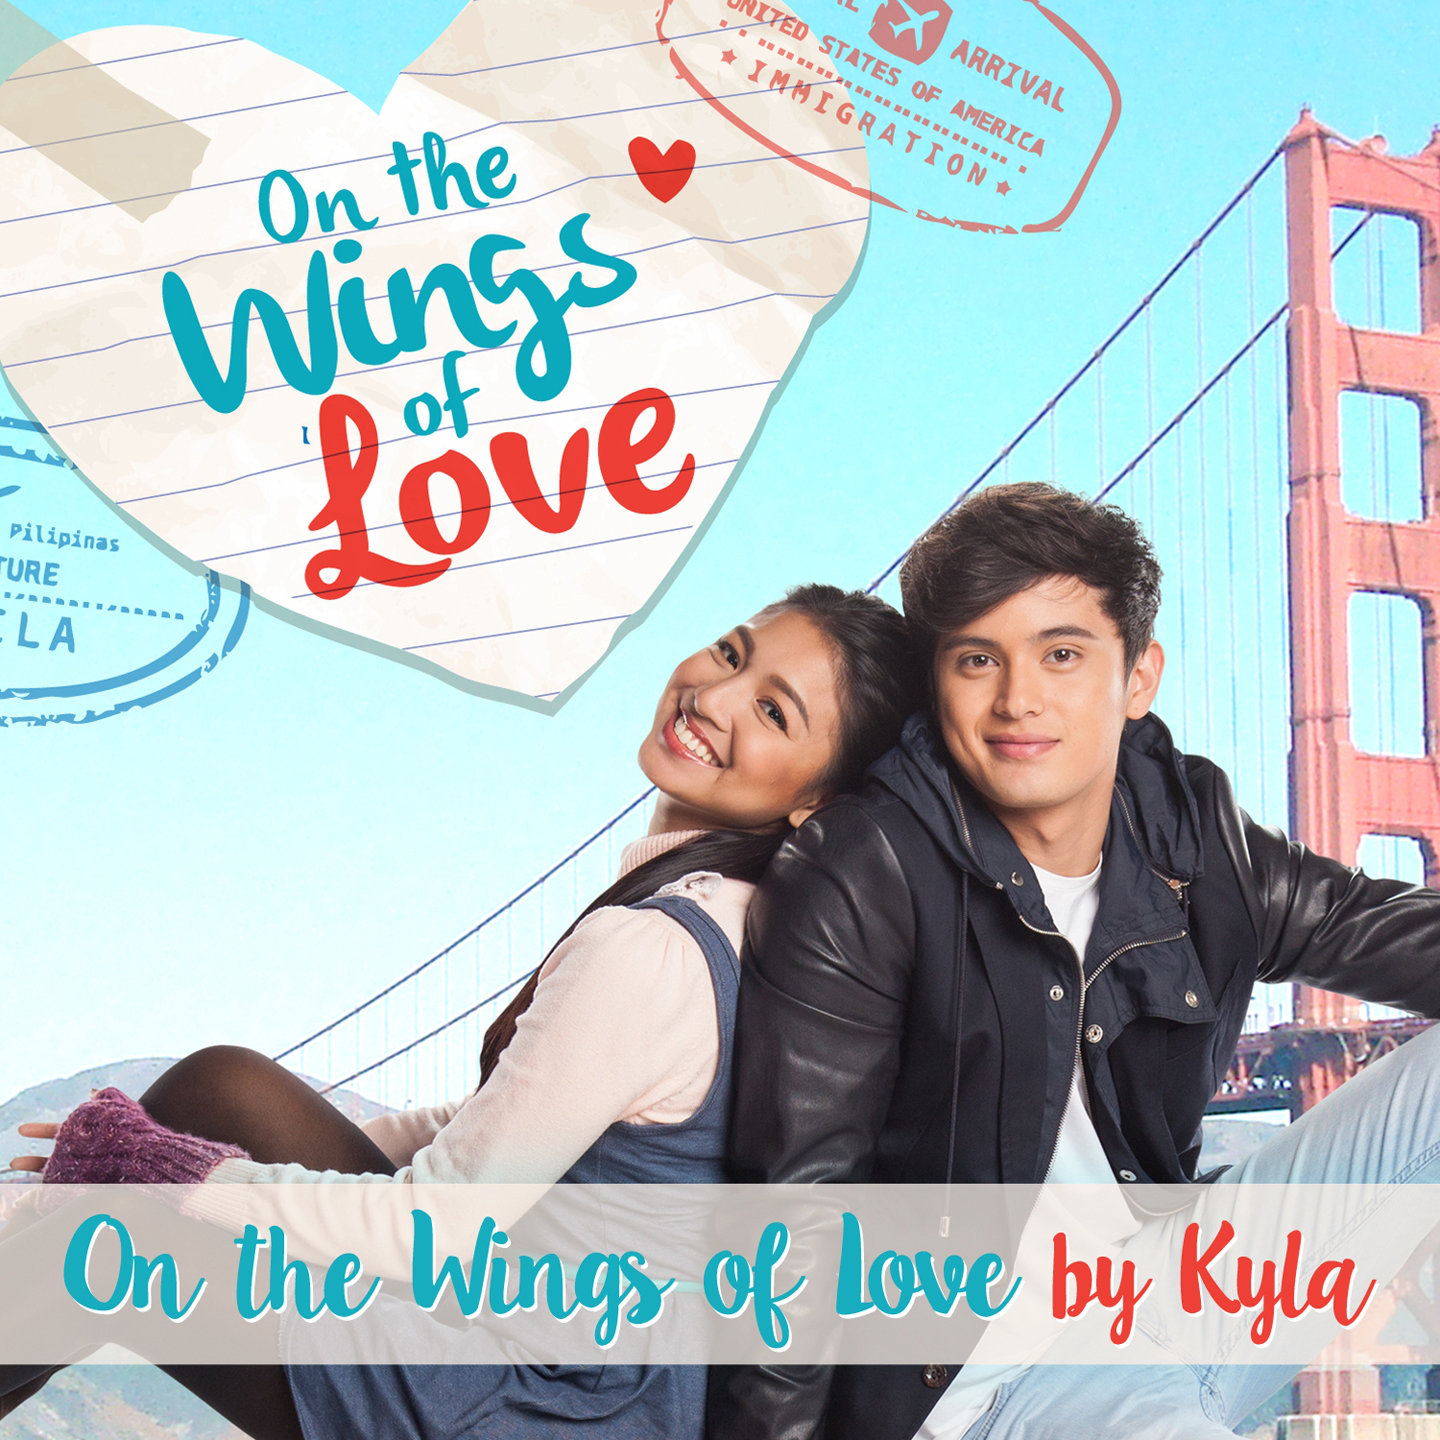 On the wings of love trailer